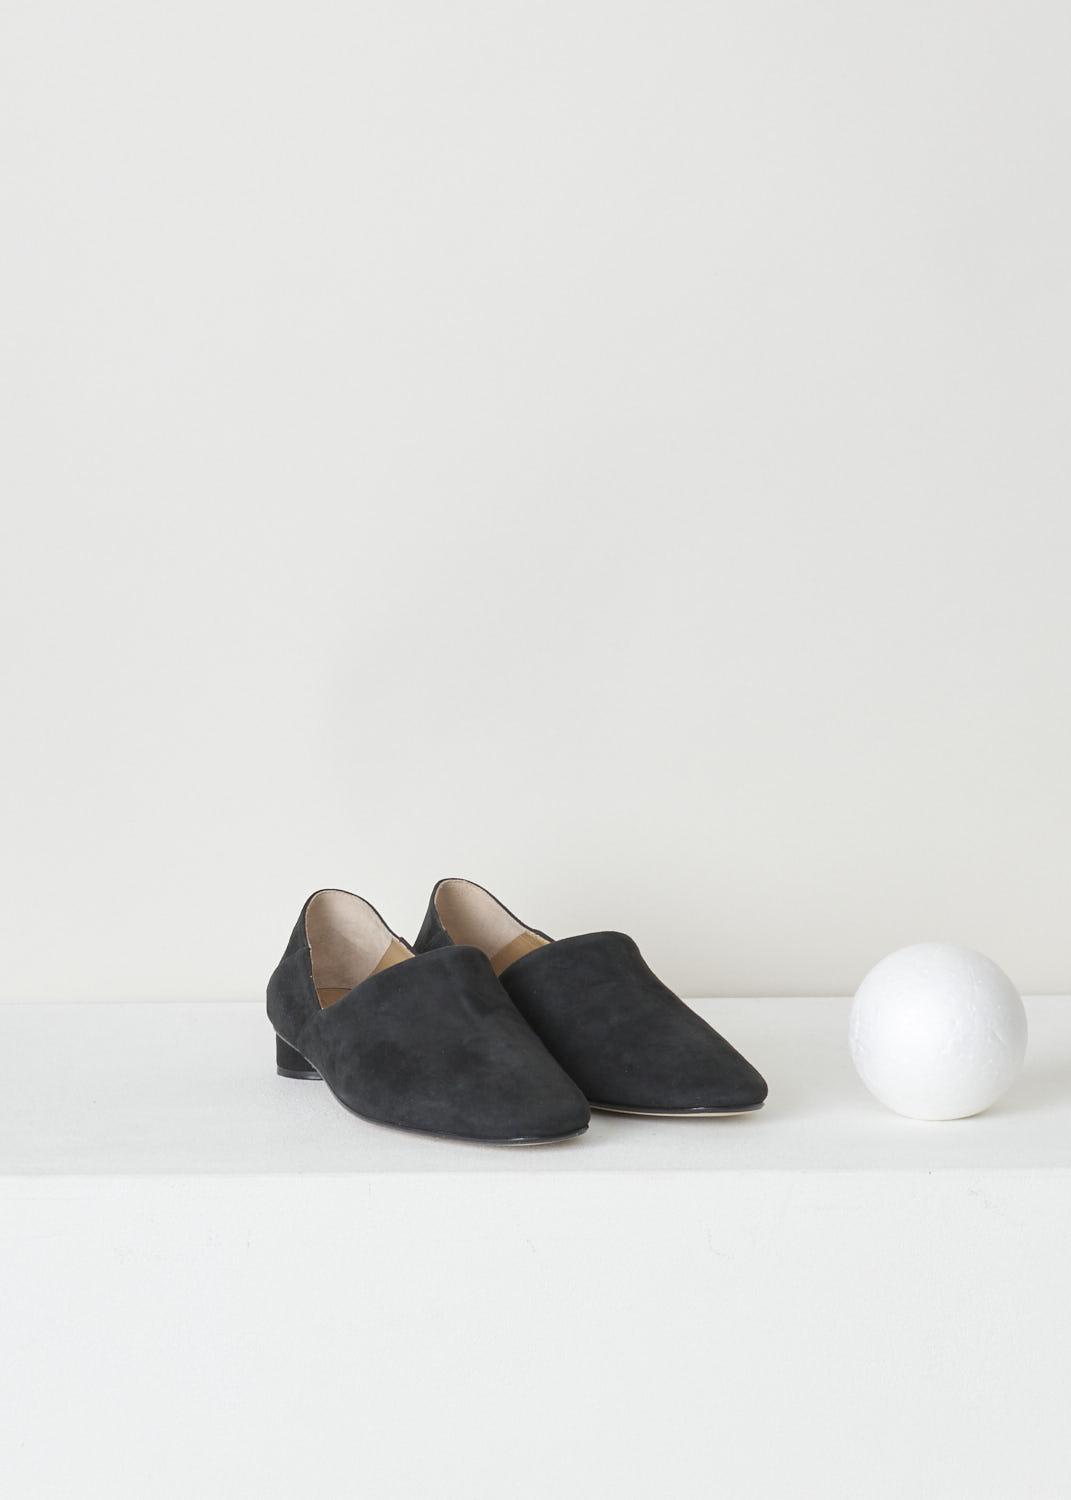 THE ROW, BLACK SUEDE SLIPPER, NOELLE_F1000_L25_BLK, Black, Front, Minimalistic black suede slipper. The slip-in model features a rounded toe vamp. The sober design is exactly what makes these shoes so beautiful.
